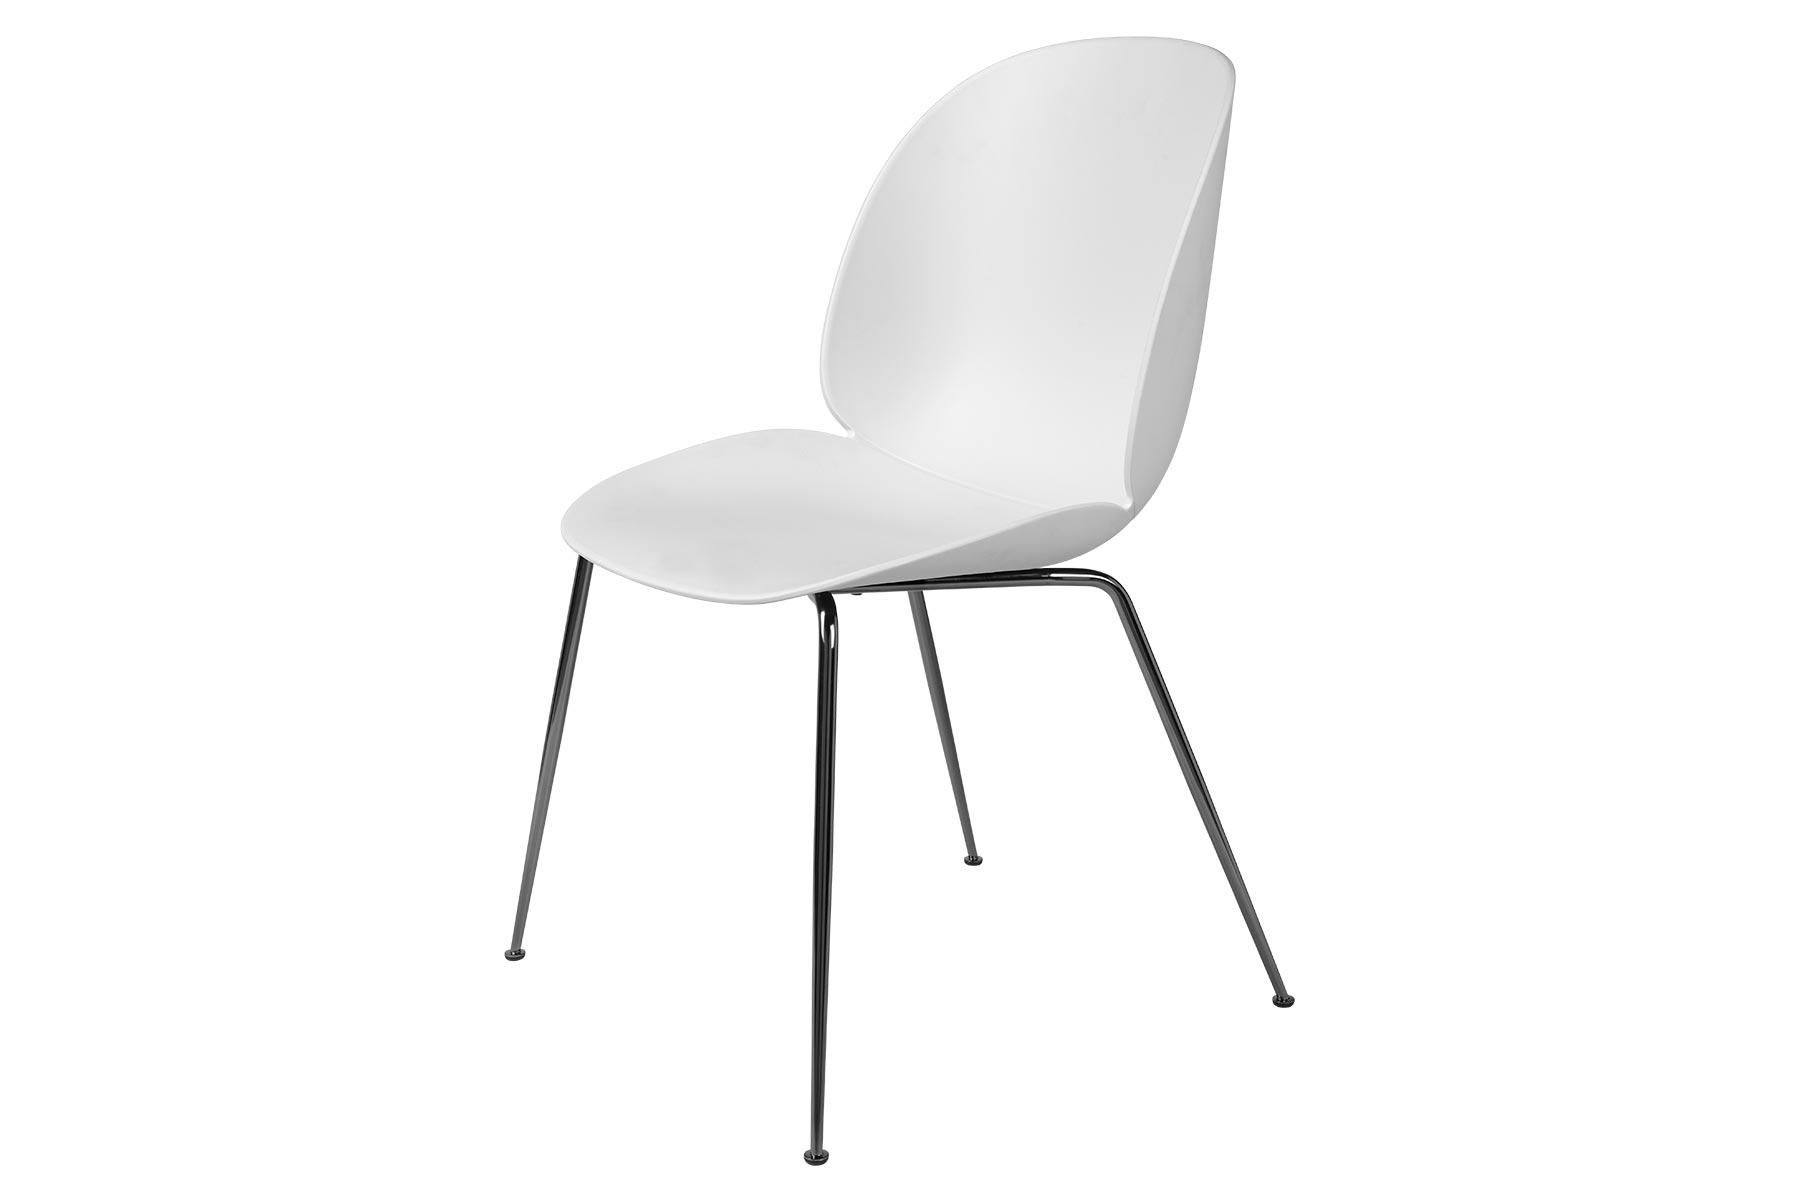 Beetle Dining Chair, Un-Upholstered, Conic Base, Black Chrome In New Condition For Sale In Berkeley, CA